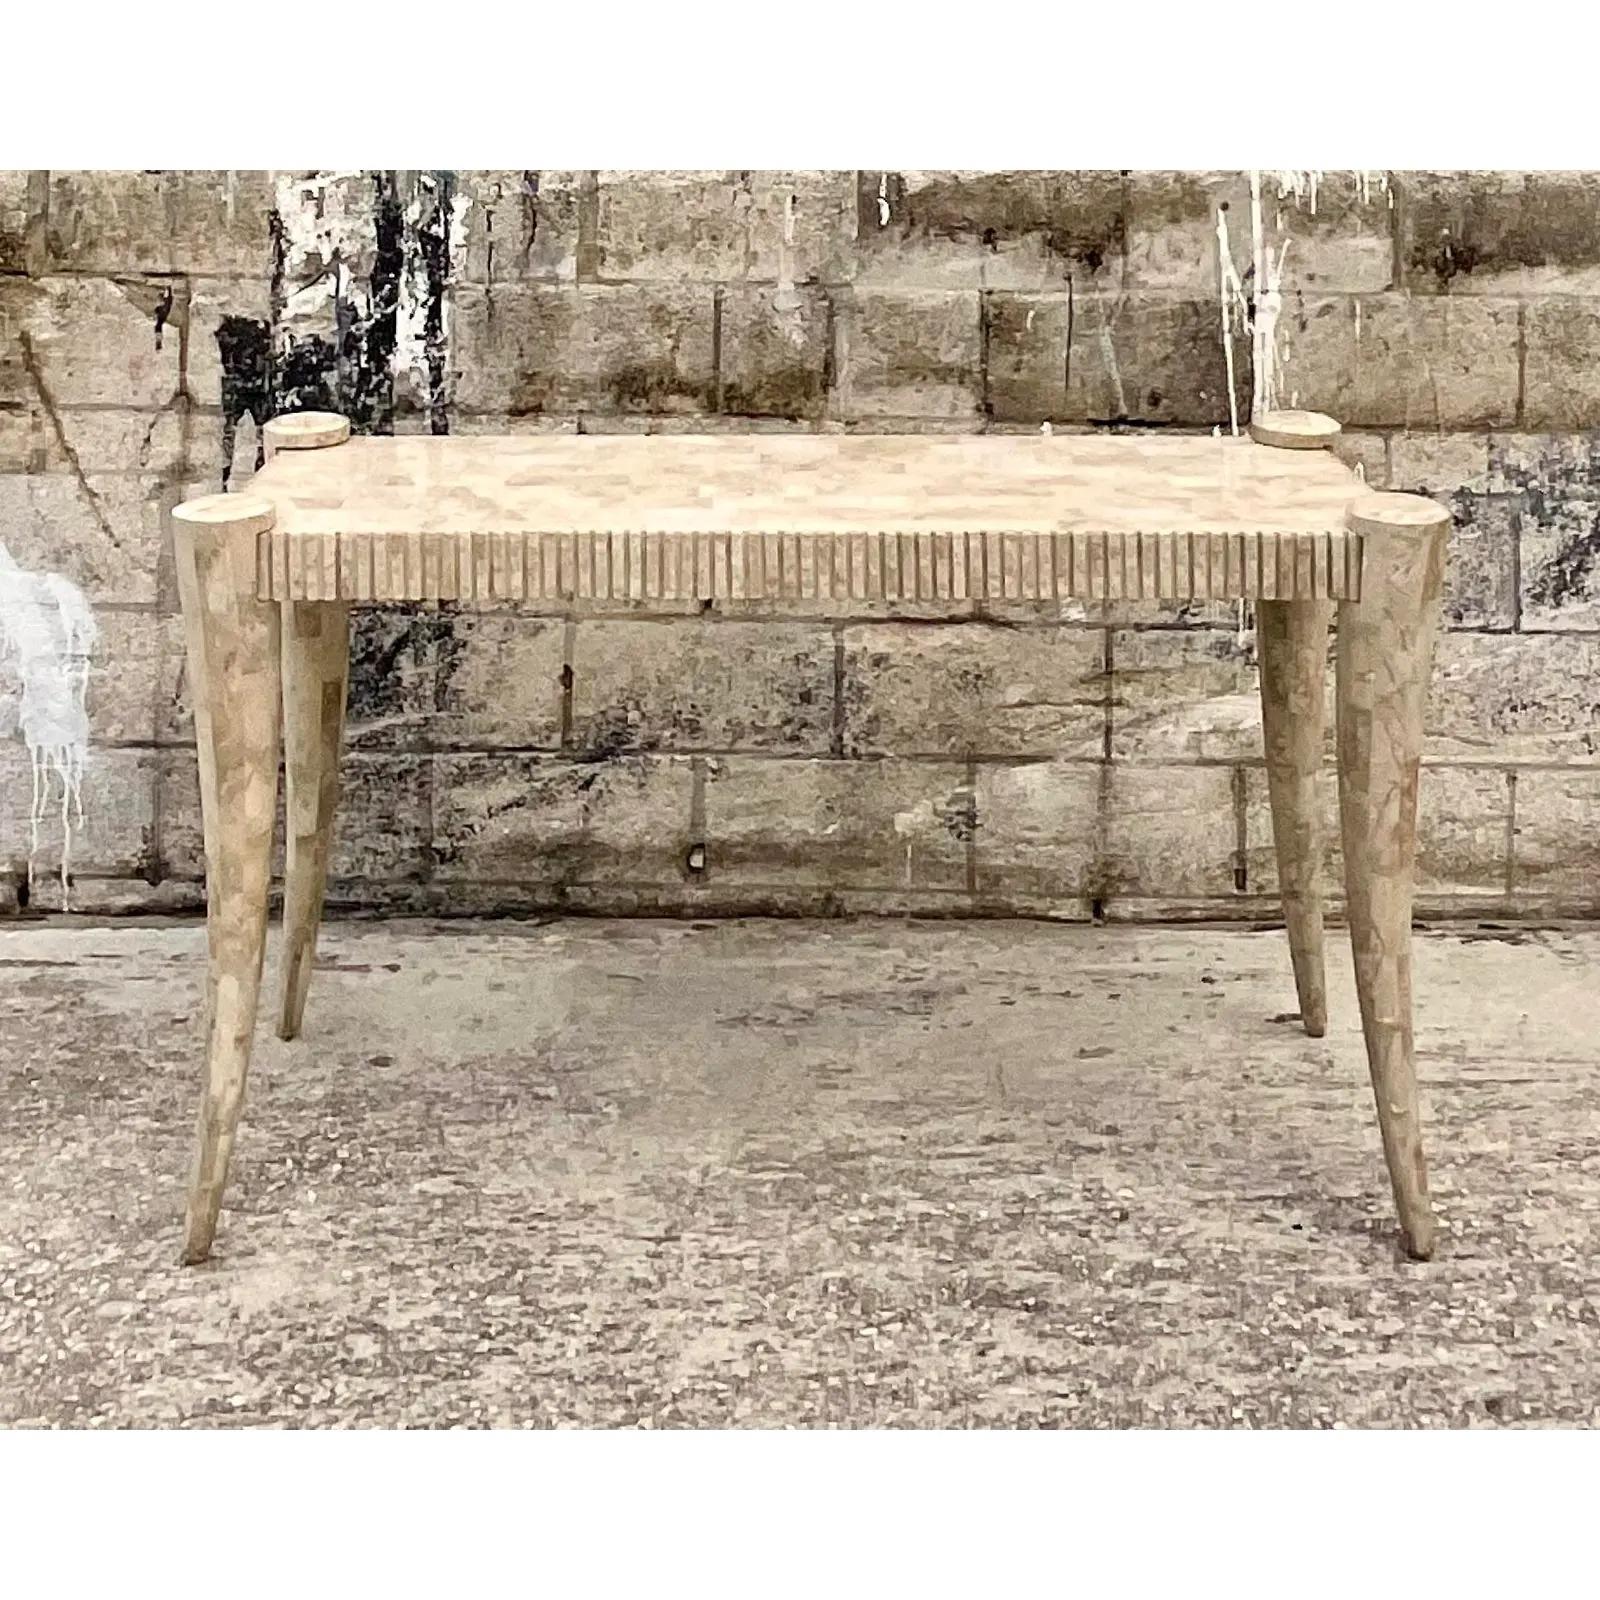 Fantastic vintage Coastal console table. Beautiful tessellated stone with carved detail along the edge. A really striking look. Acquired from a Palm Beach estate.